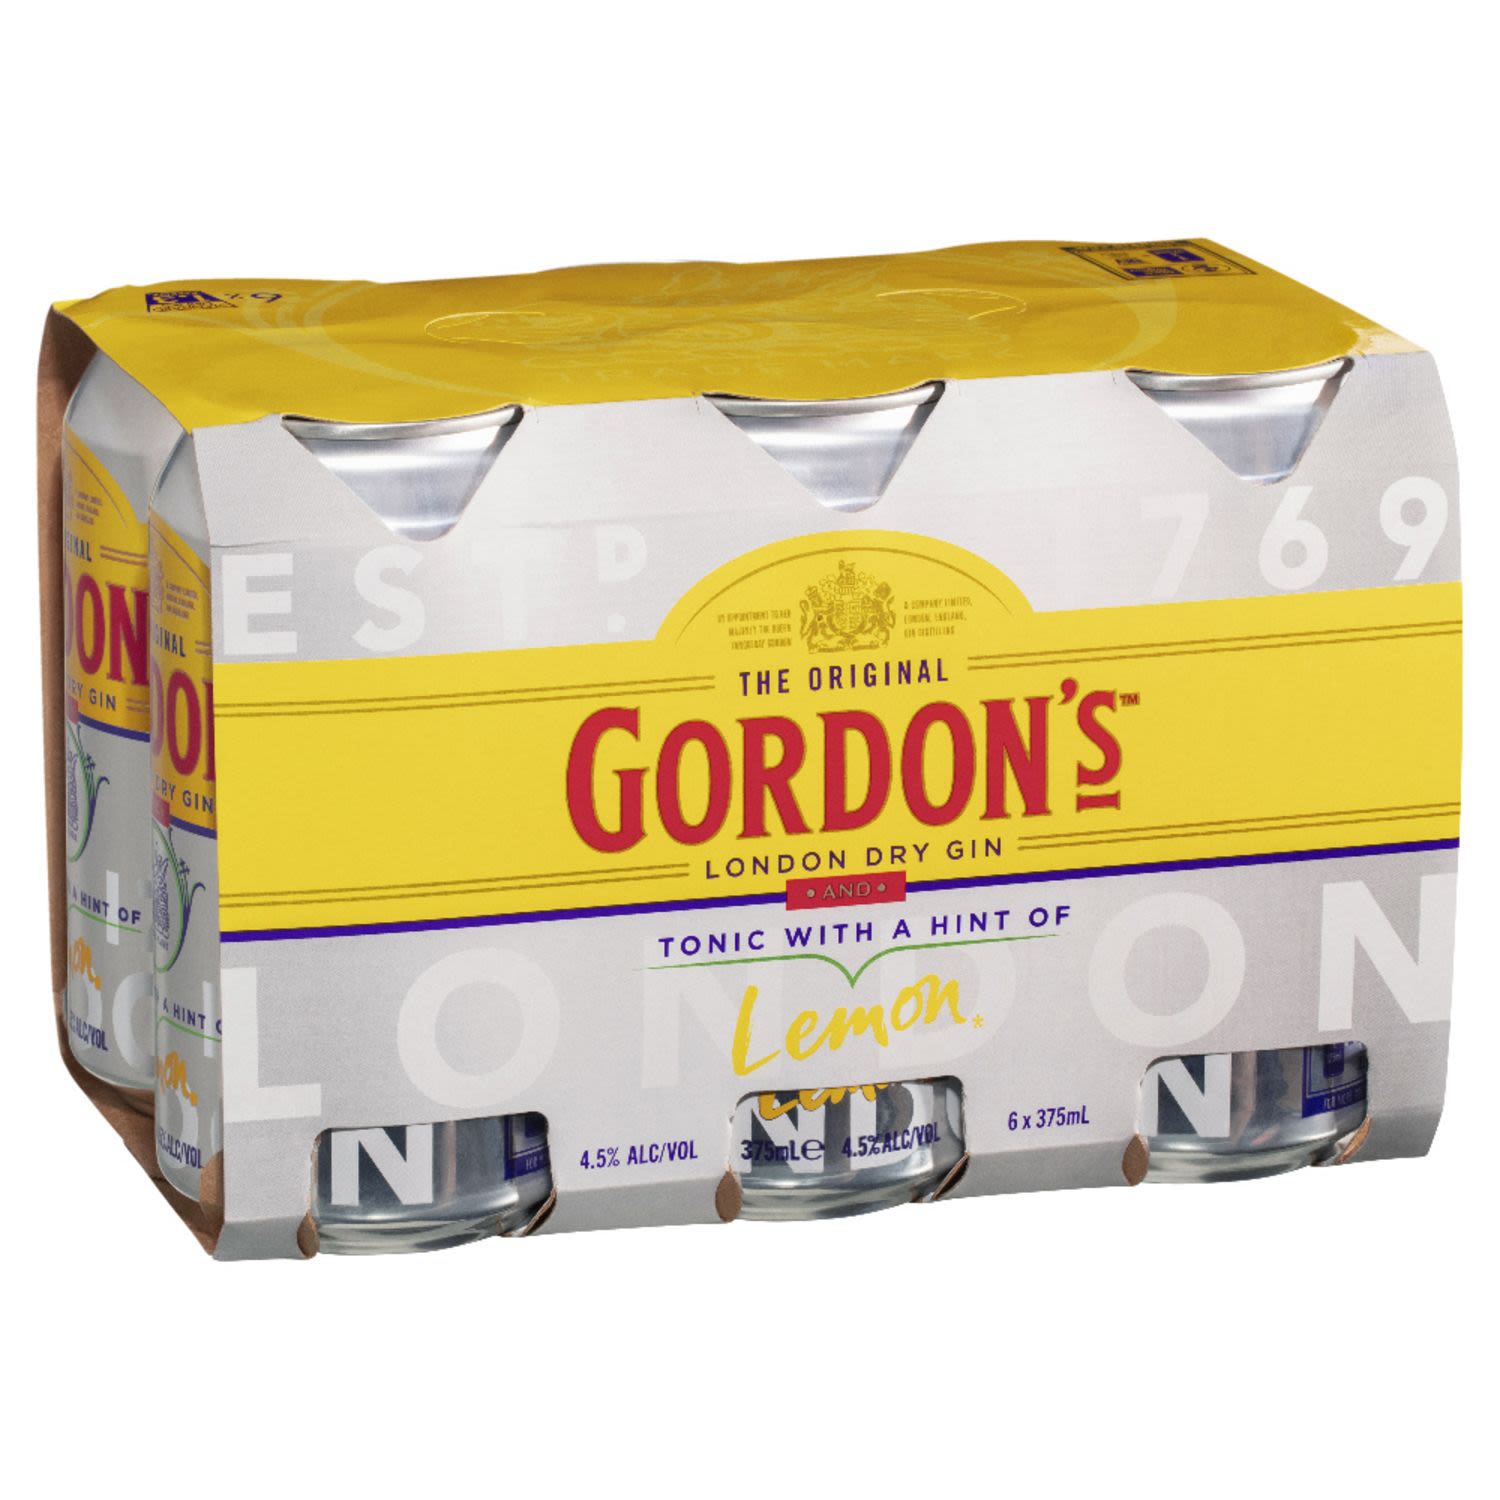 Enjoy the iconic juniper flavour with Gordon's Gin & Tonic with a hint of lemon that makes for a classic G&T. Best served chilled or in a glass with ice and lime. Perfect for picnics in the park or when out and about with friends, the Gordon's and tonic can ensures a perfectly balanced G&T every time.<br /> <br />Alcohol Volume: 4.50%<br /><br />Pack Format: 6 Pack<br /><br />Standard Drinks: 1.3</br /><br />Pack Type: Can<br />